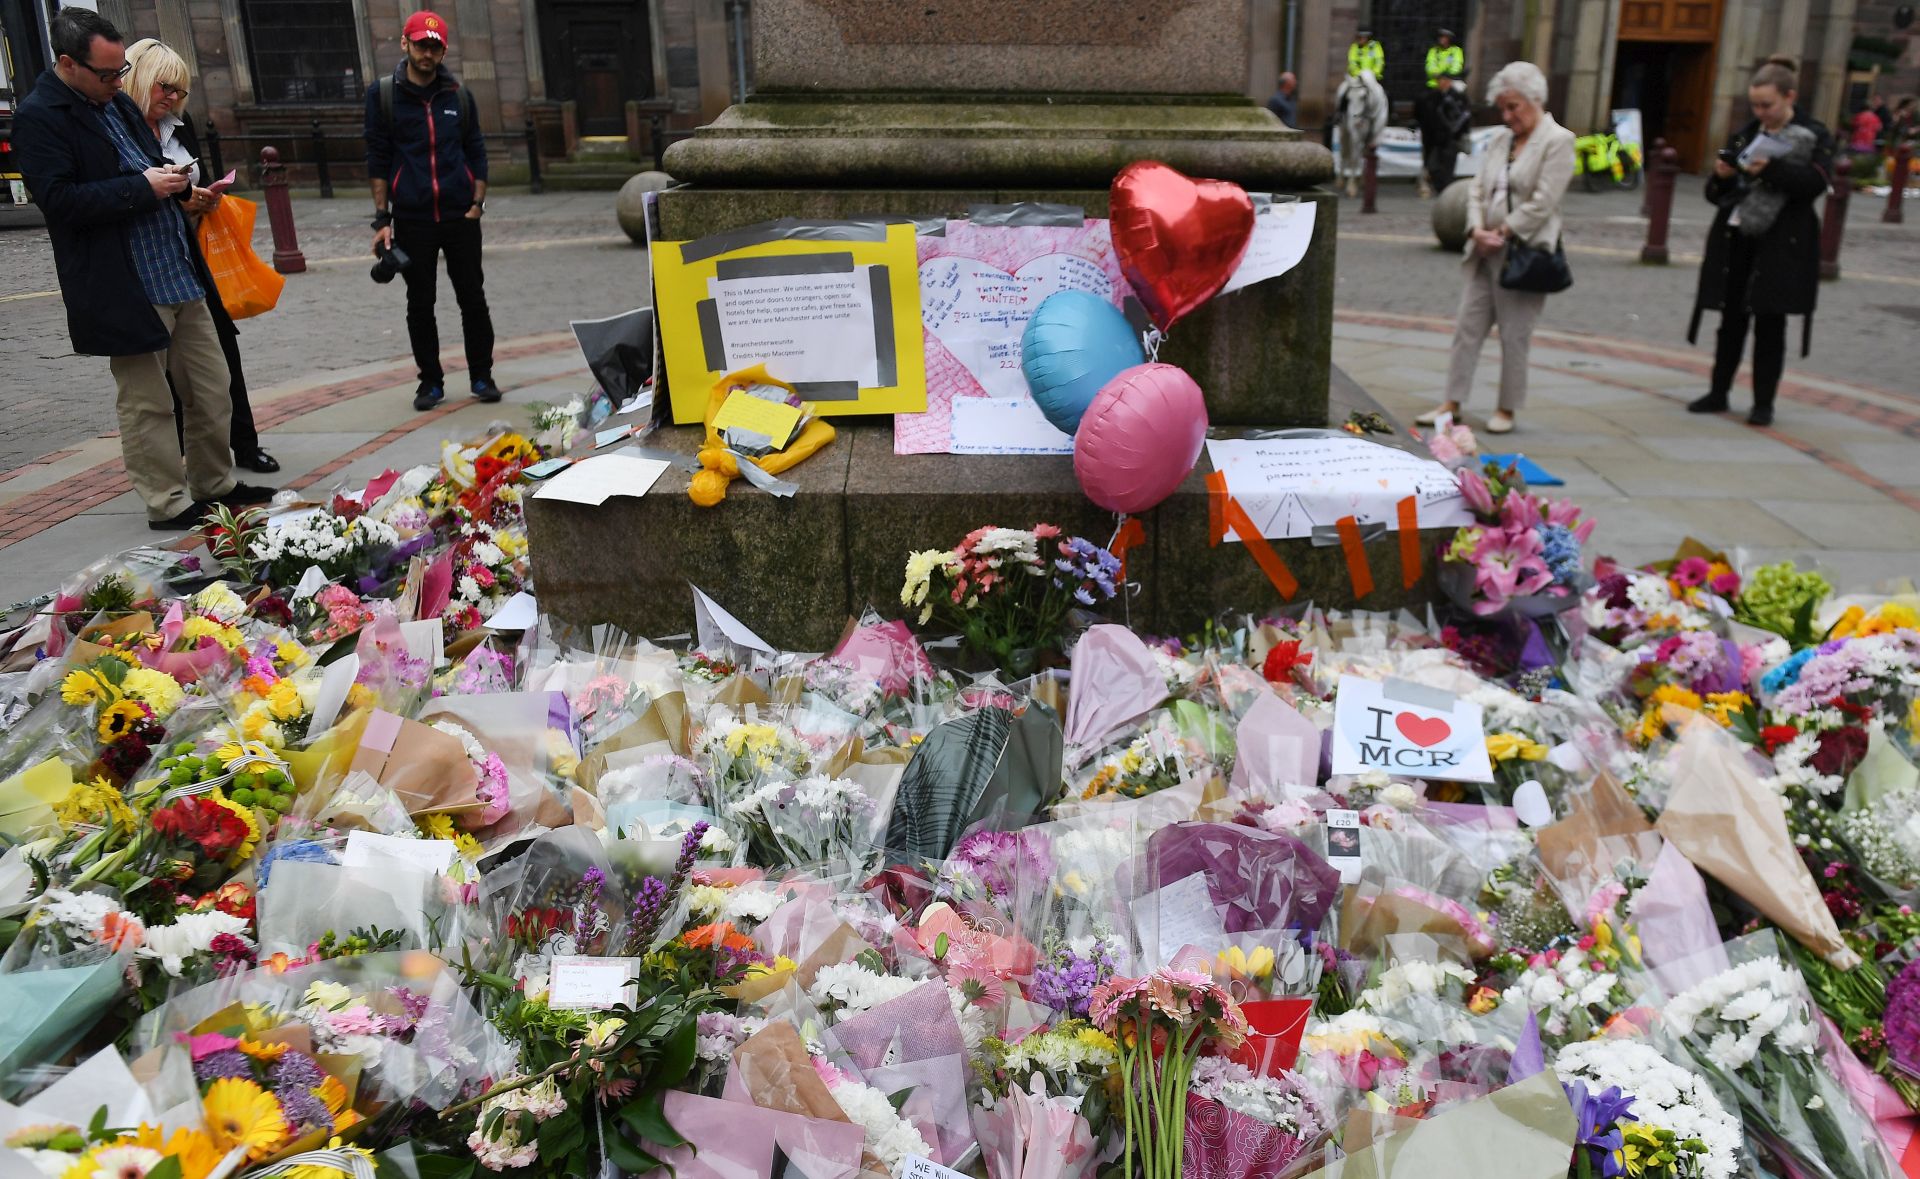 epa05985896 Tributes at a vigil for the people who lost their lives during the Manchester terror attack in central Manchester, Britain, 24 May 2017. Britain is on critical alert following the Manchester terror attack on the Manchester Arena late 22 May, that saw 22 people loose their lives with scores of people injured. The government has indicated that the military are to be deployed on the streets along side the police.  EPA/ANDY RAIN